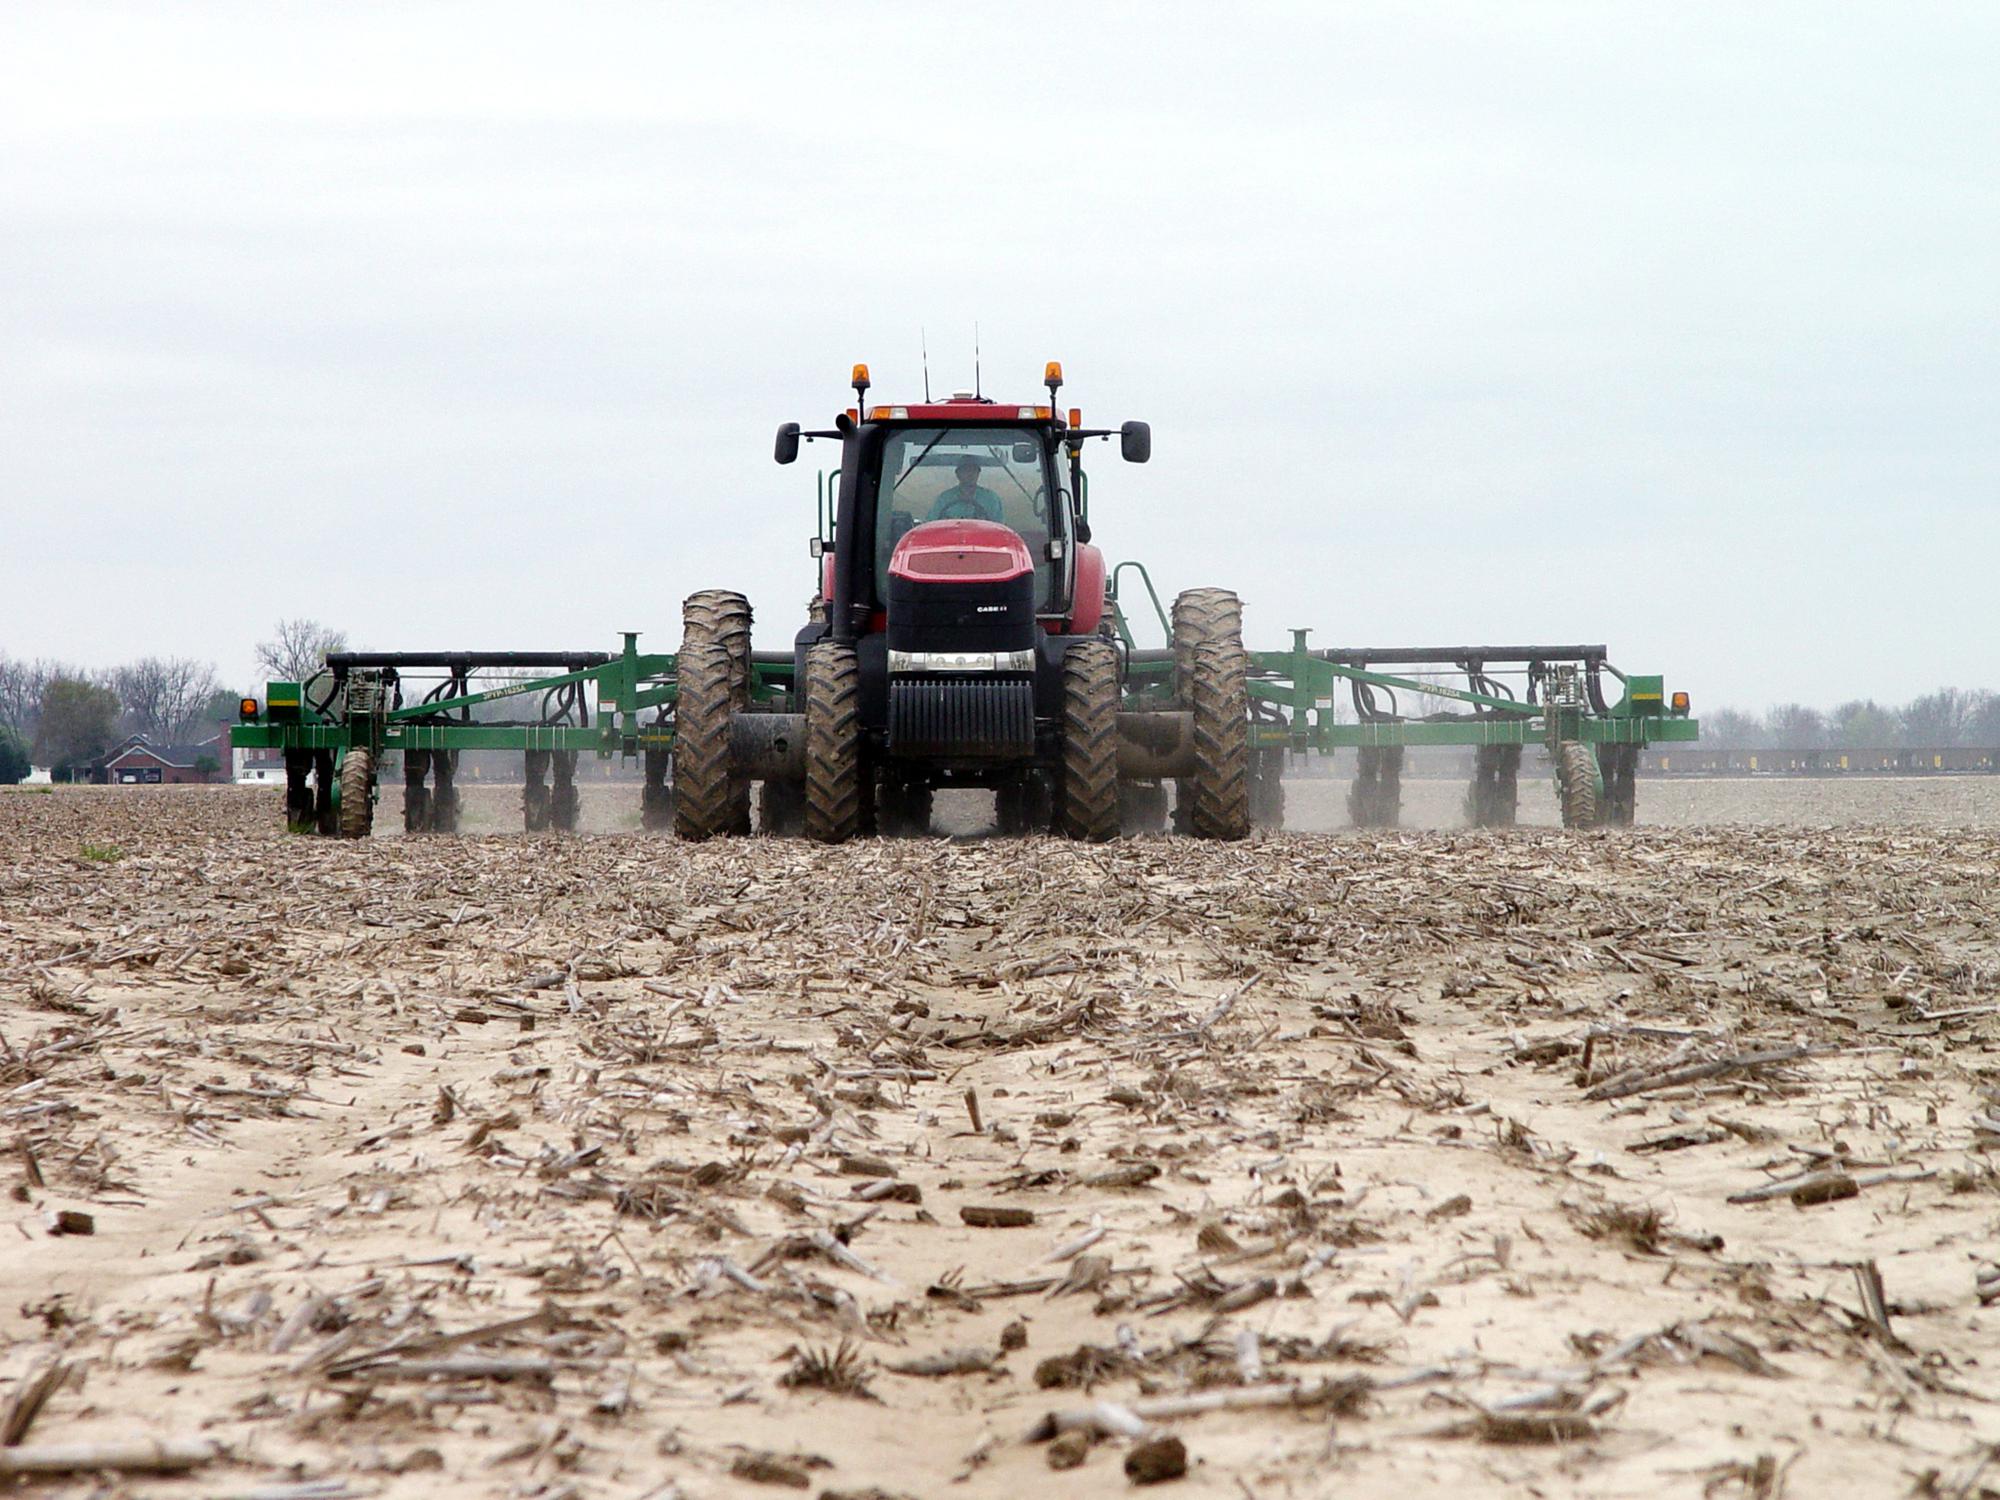 Like jets lining up on a runway, Mississippi growers are ready to take off and resume their planting as soon as the weather allows. Shaifer Bell of Huddleston Planting Co. is at the controls of this tractor as he plants corn near Metcalfe, Mississippi, on March 30, 2016. (Photo by MSU Delta Research and Extension Center Communication Department)